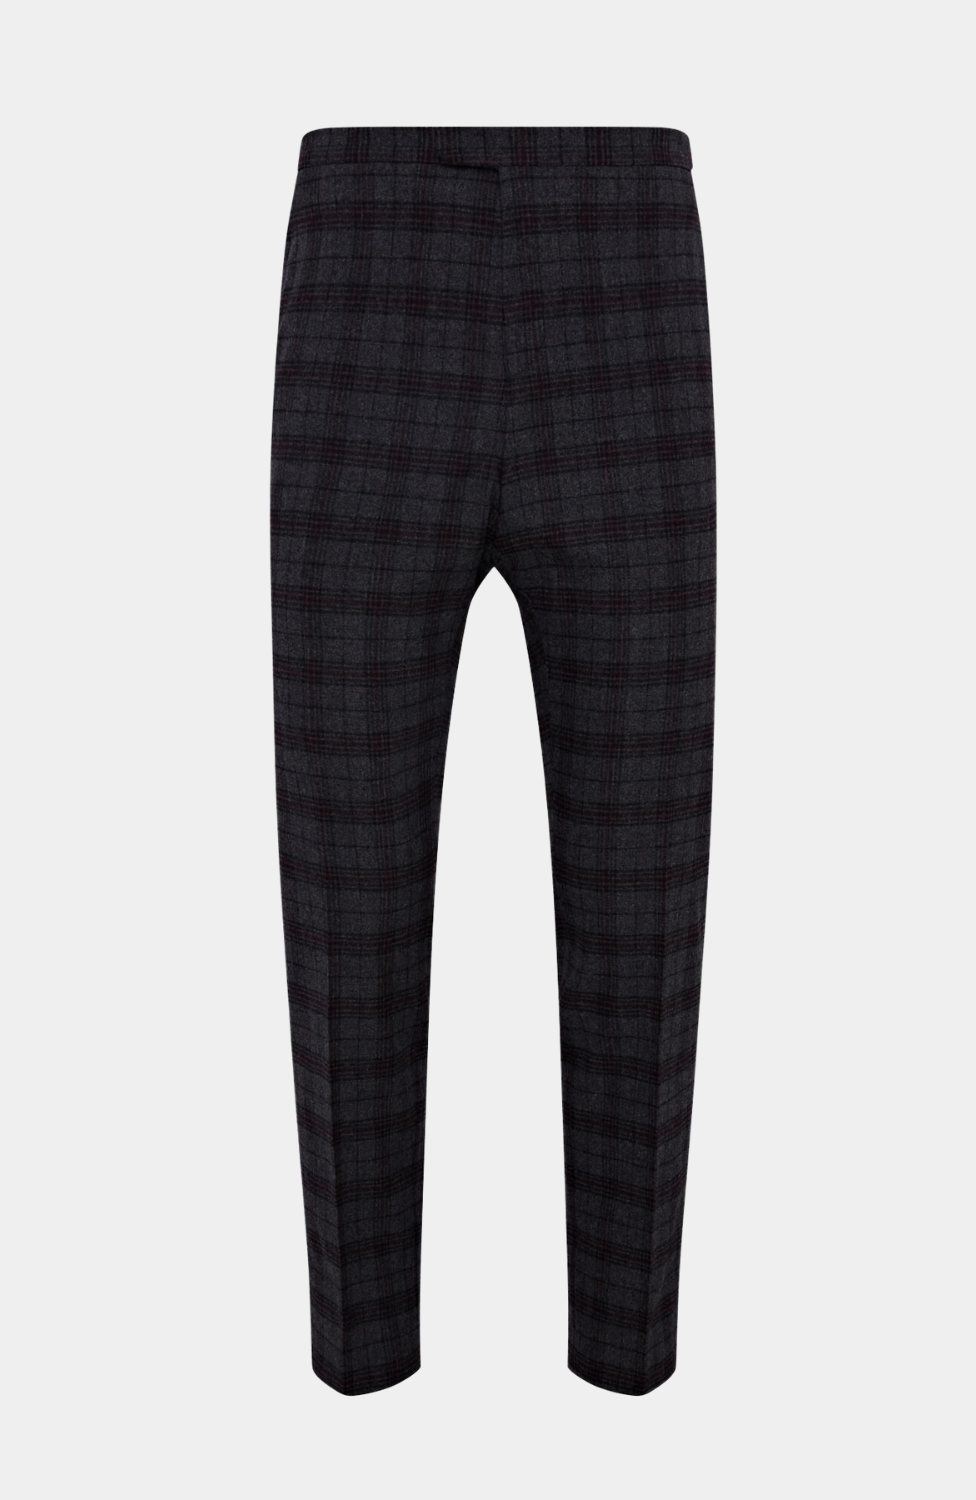 INISHEER CHECK TWEED TROUSER - HIRE: £25.00